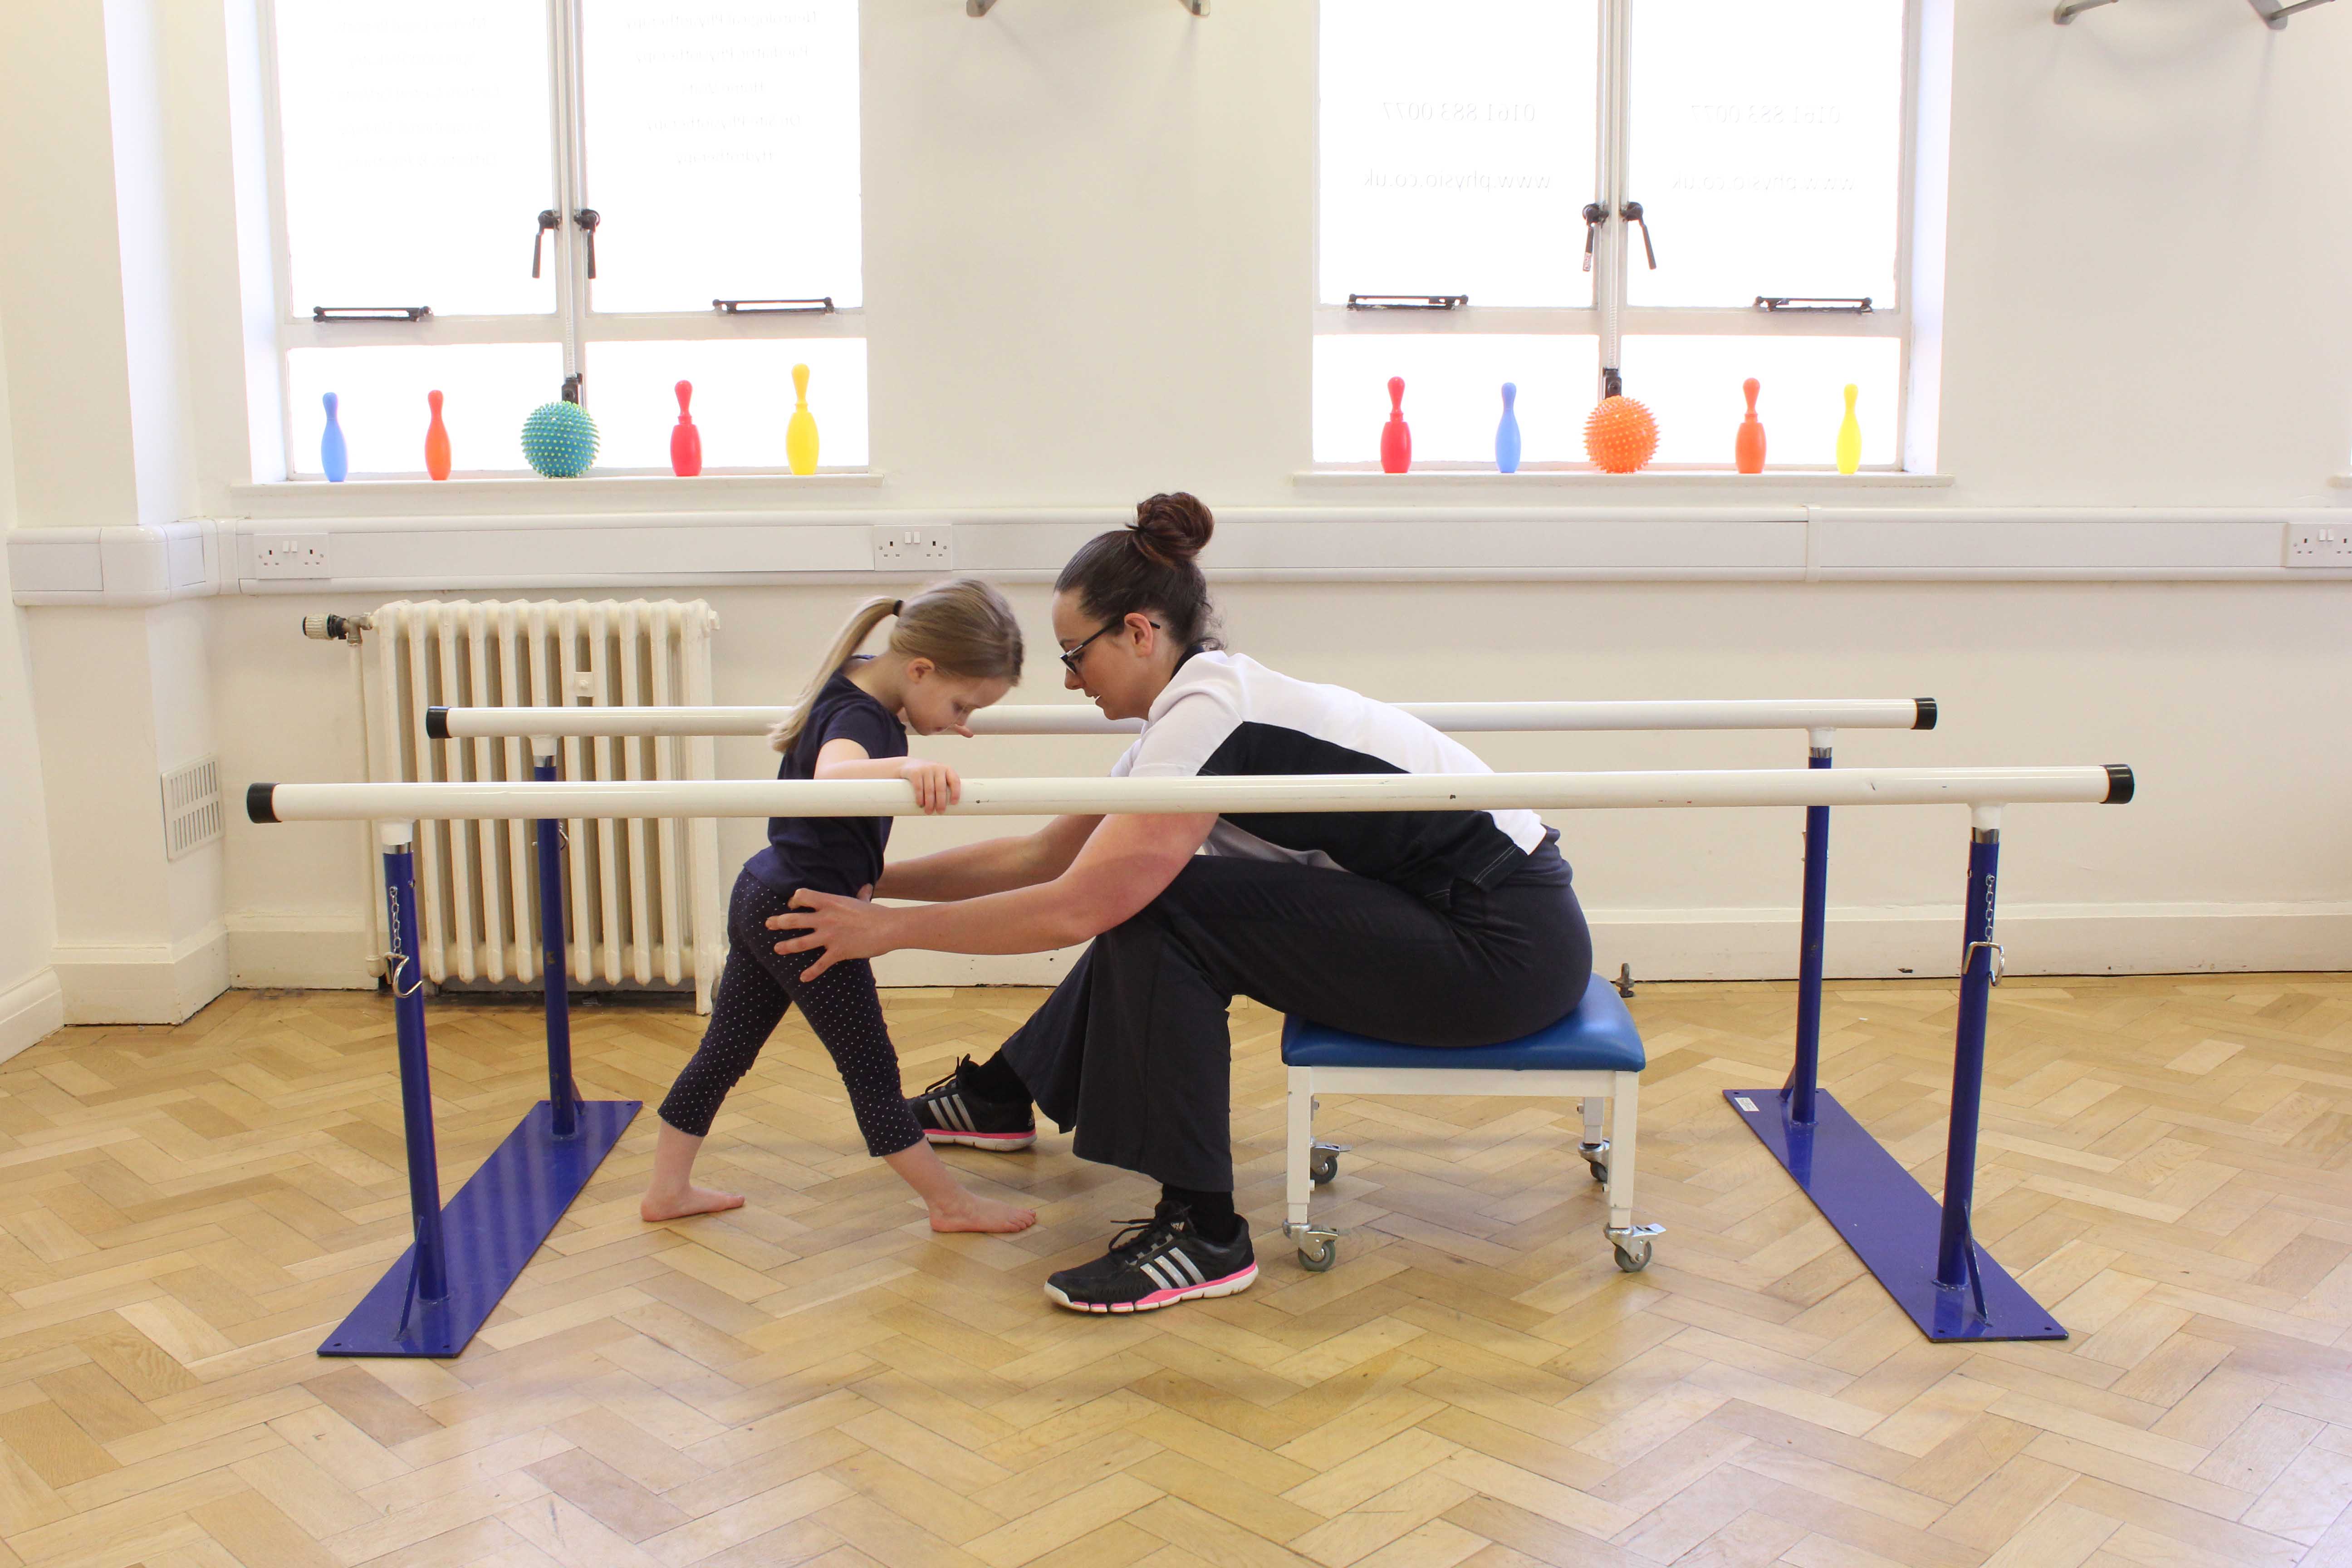 Mobility exercises assisted by the physiotherapist between the parallel bars